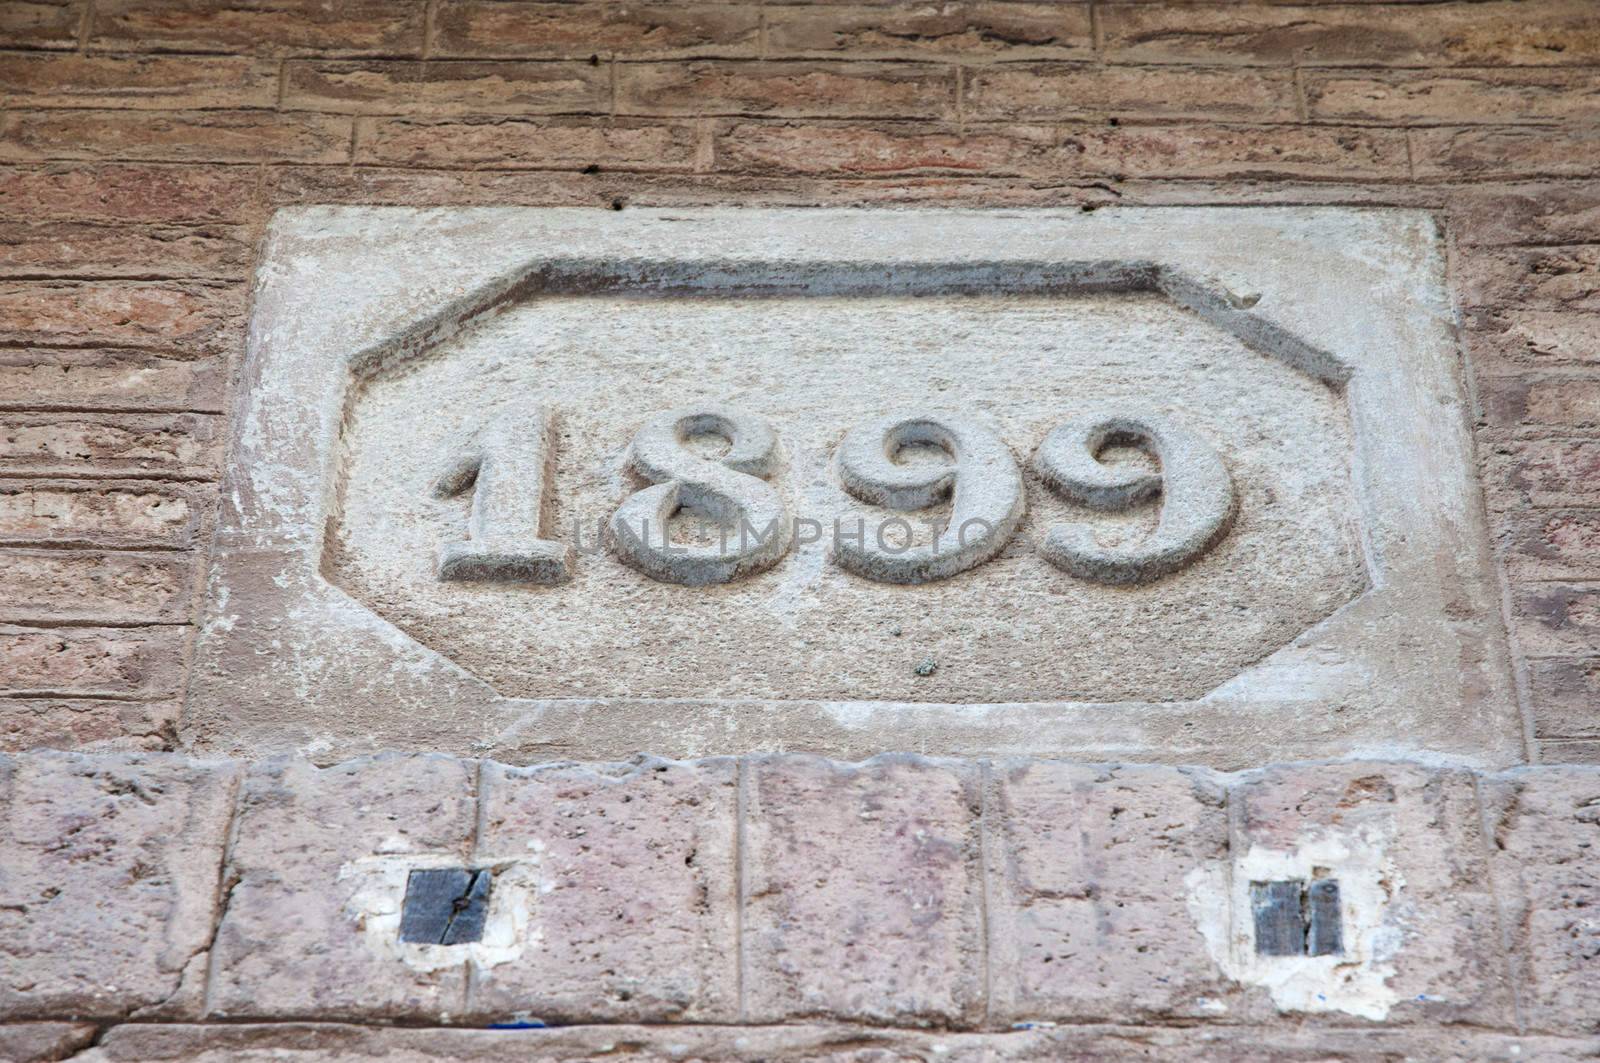 1899 number written on the stone wall